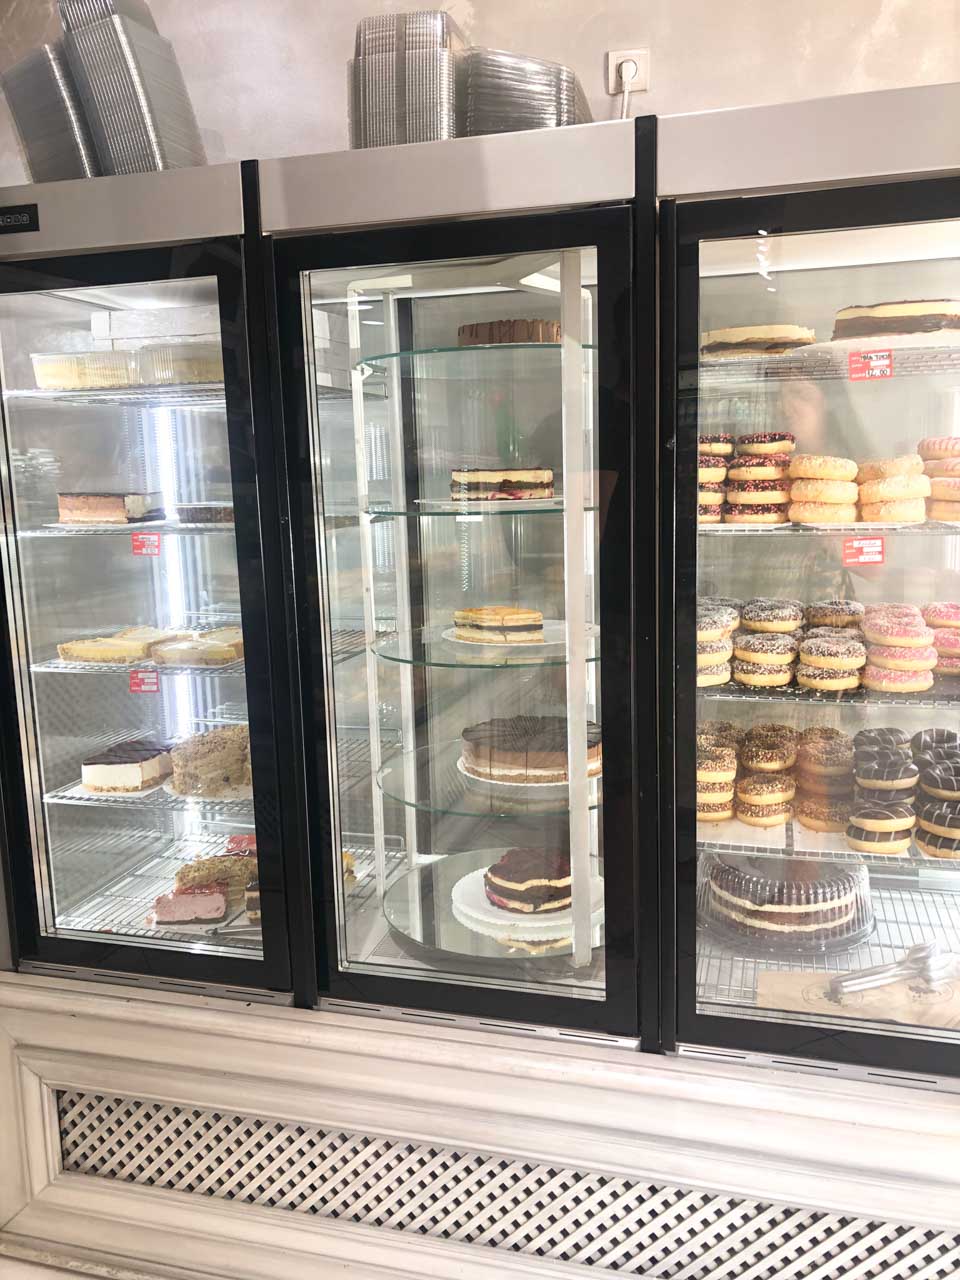 Pastries, donuts, and cakes in a glass display case at Pekara Buongiorno in Kotor, Montenegro